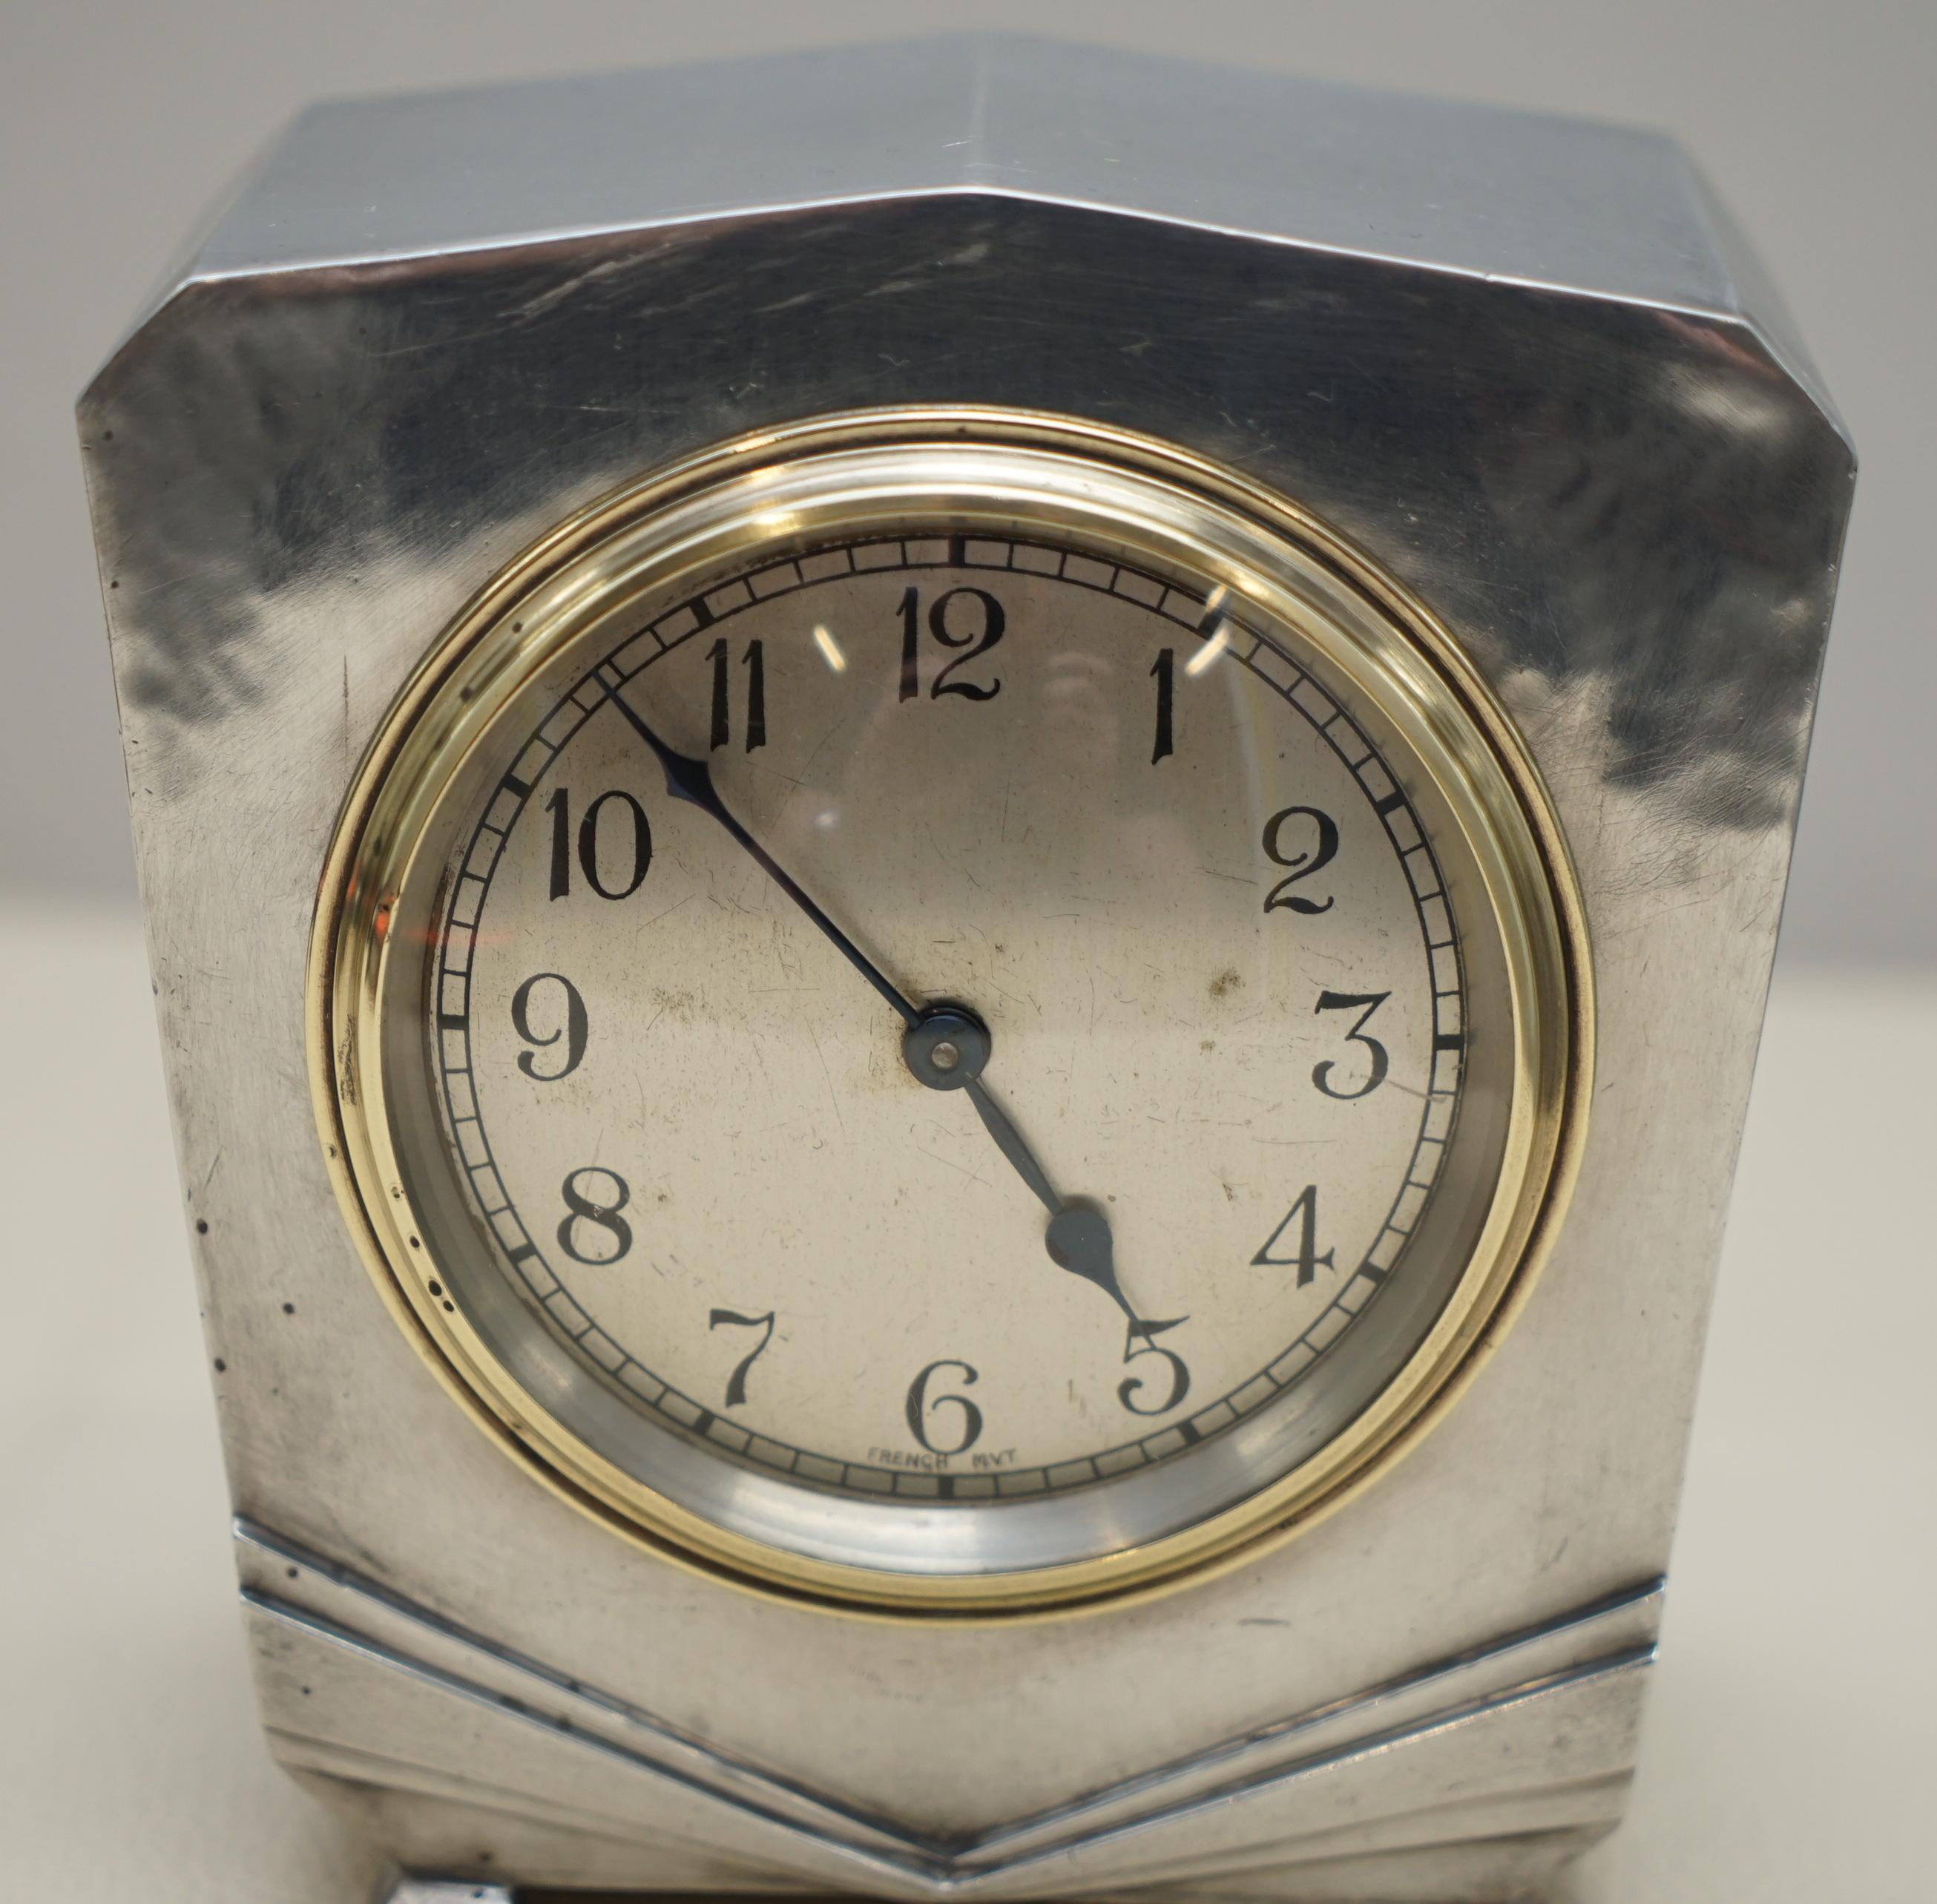 Rare 1936 Liberty's London Tudric Pewter Mantel Clock Highly Collectable Piece 1